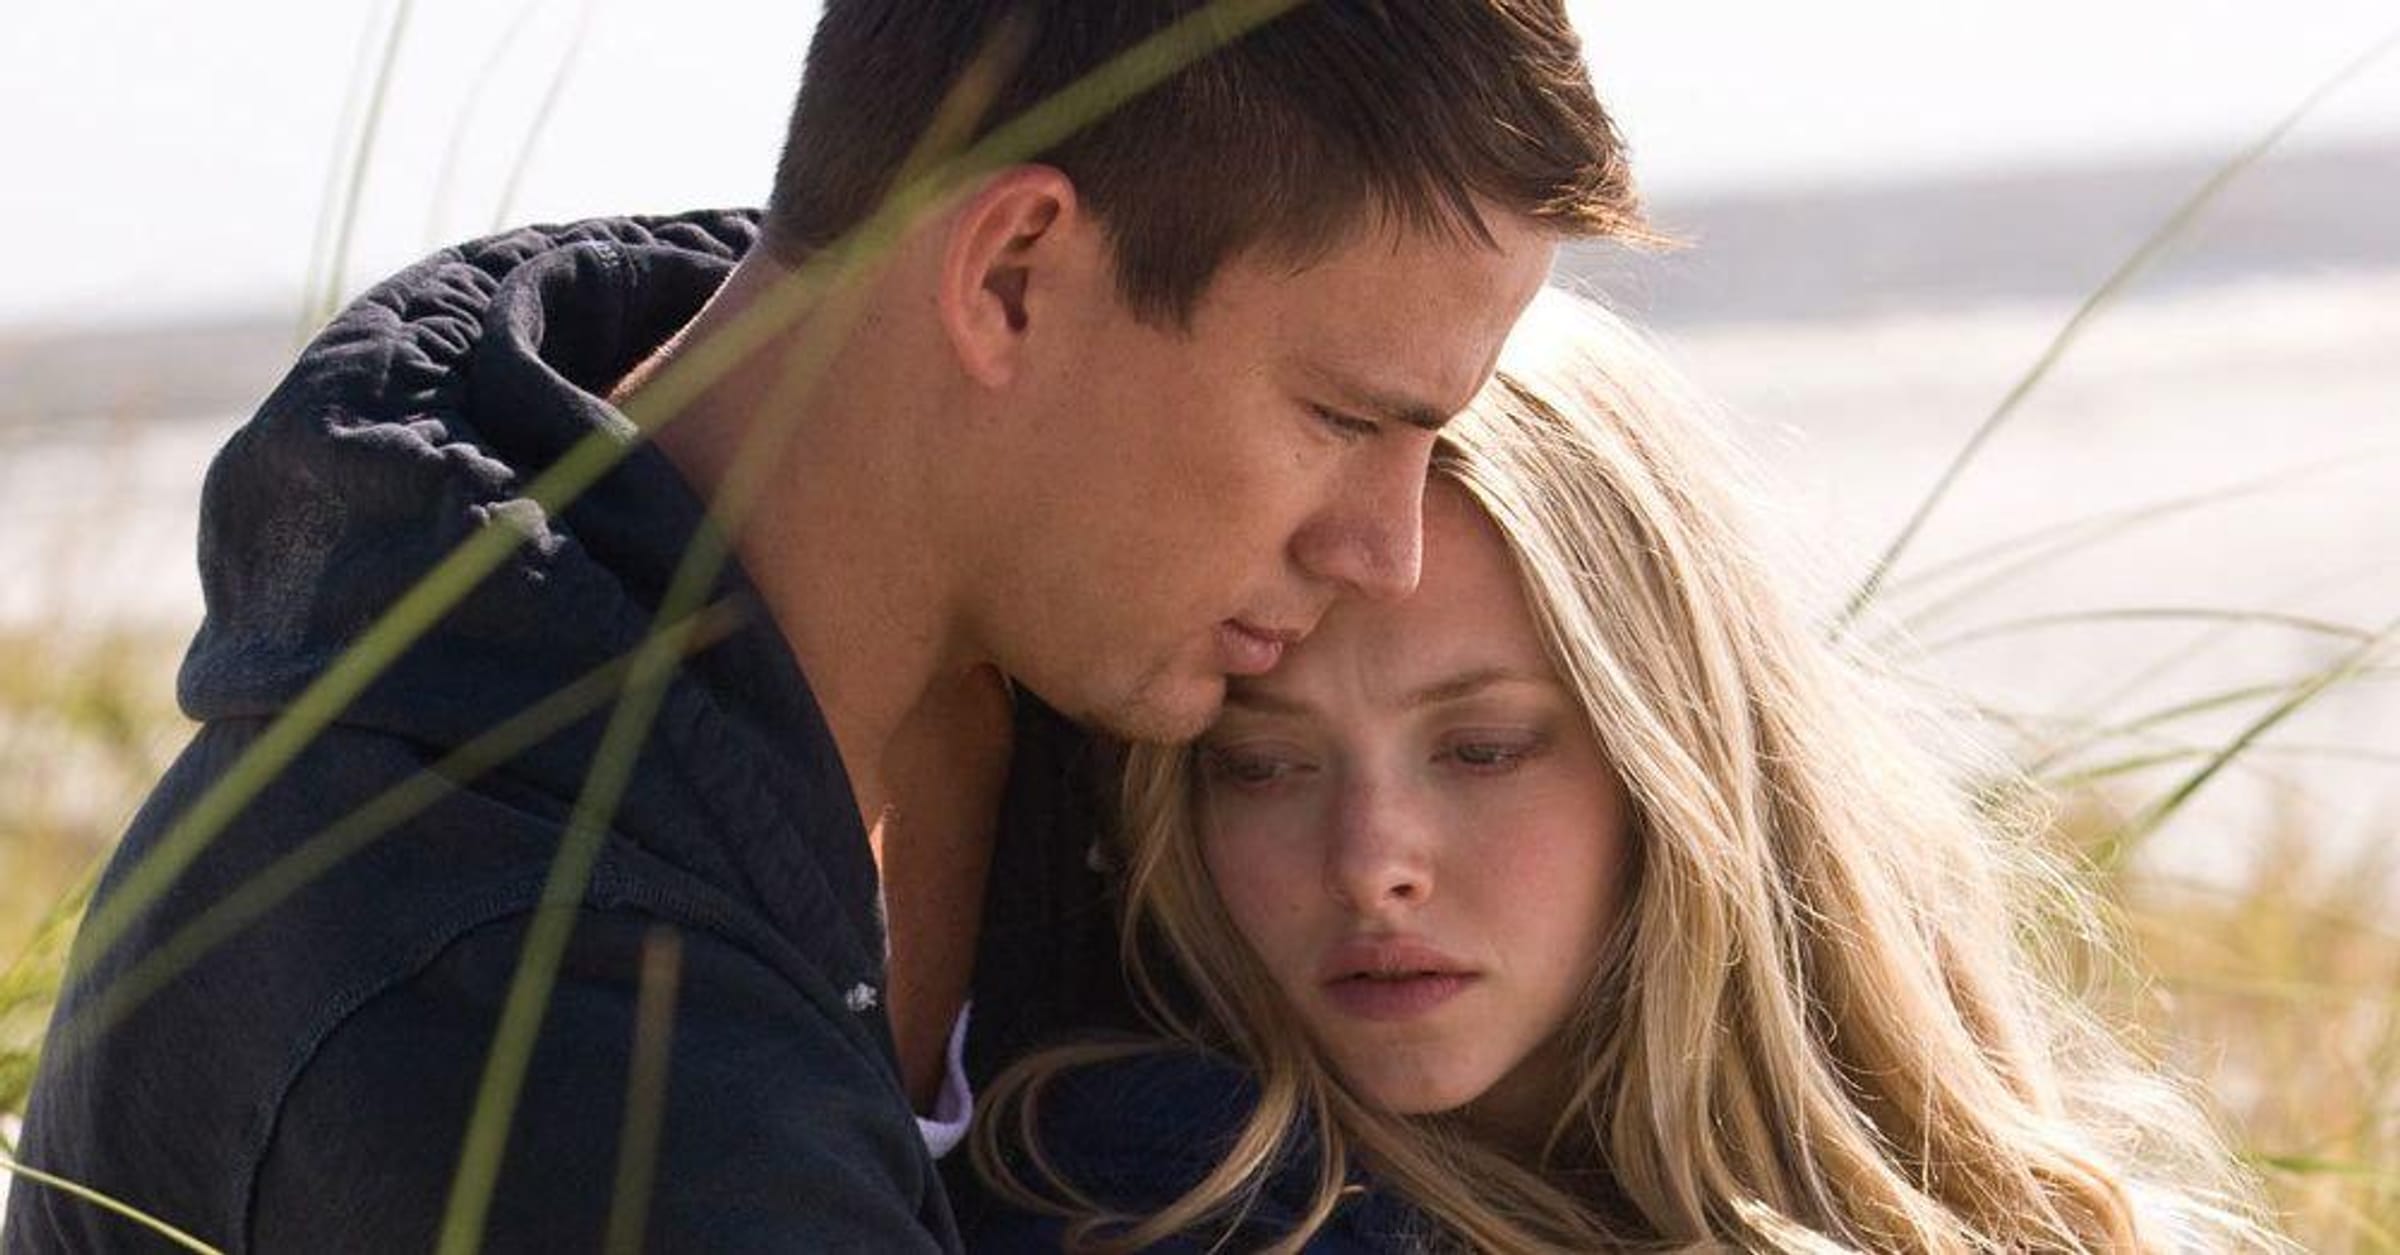 23 Sad Romantic Movies to Watch If You Need a Good Cry